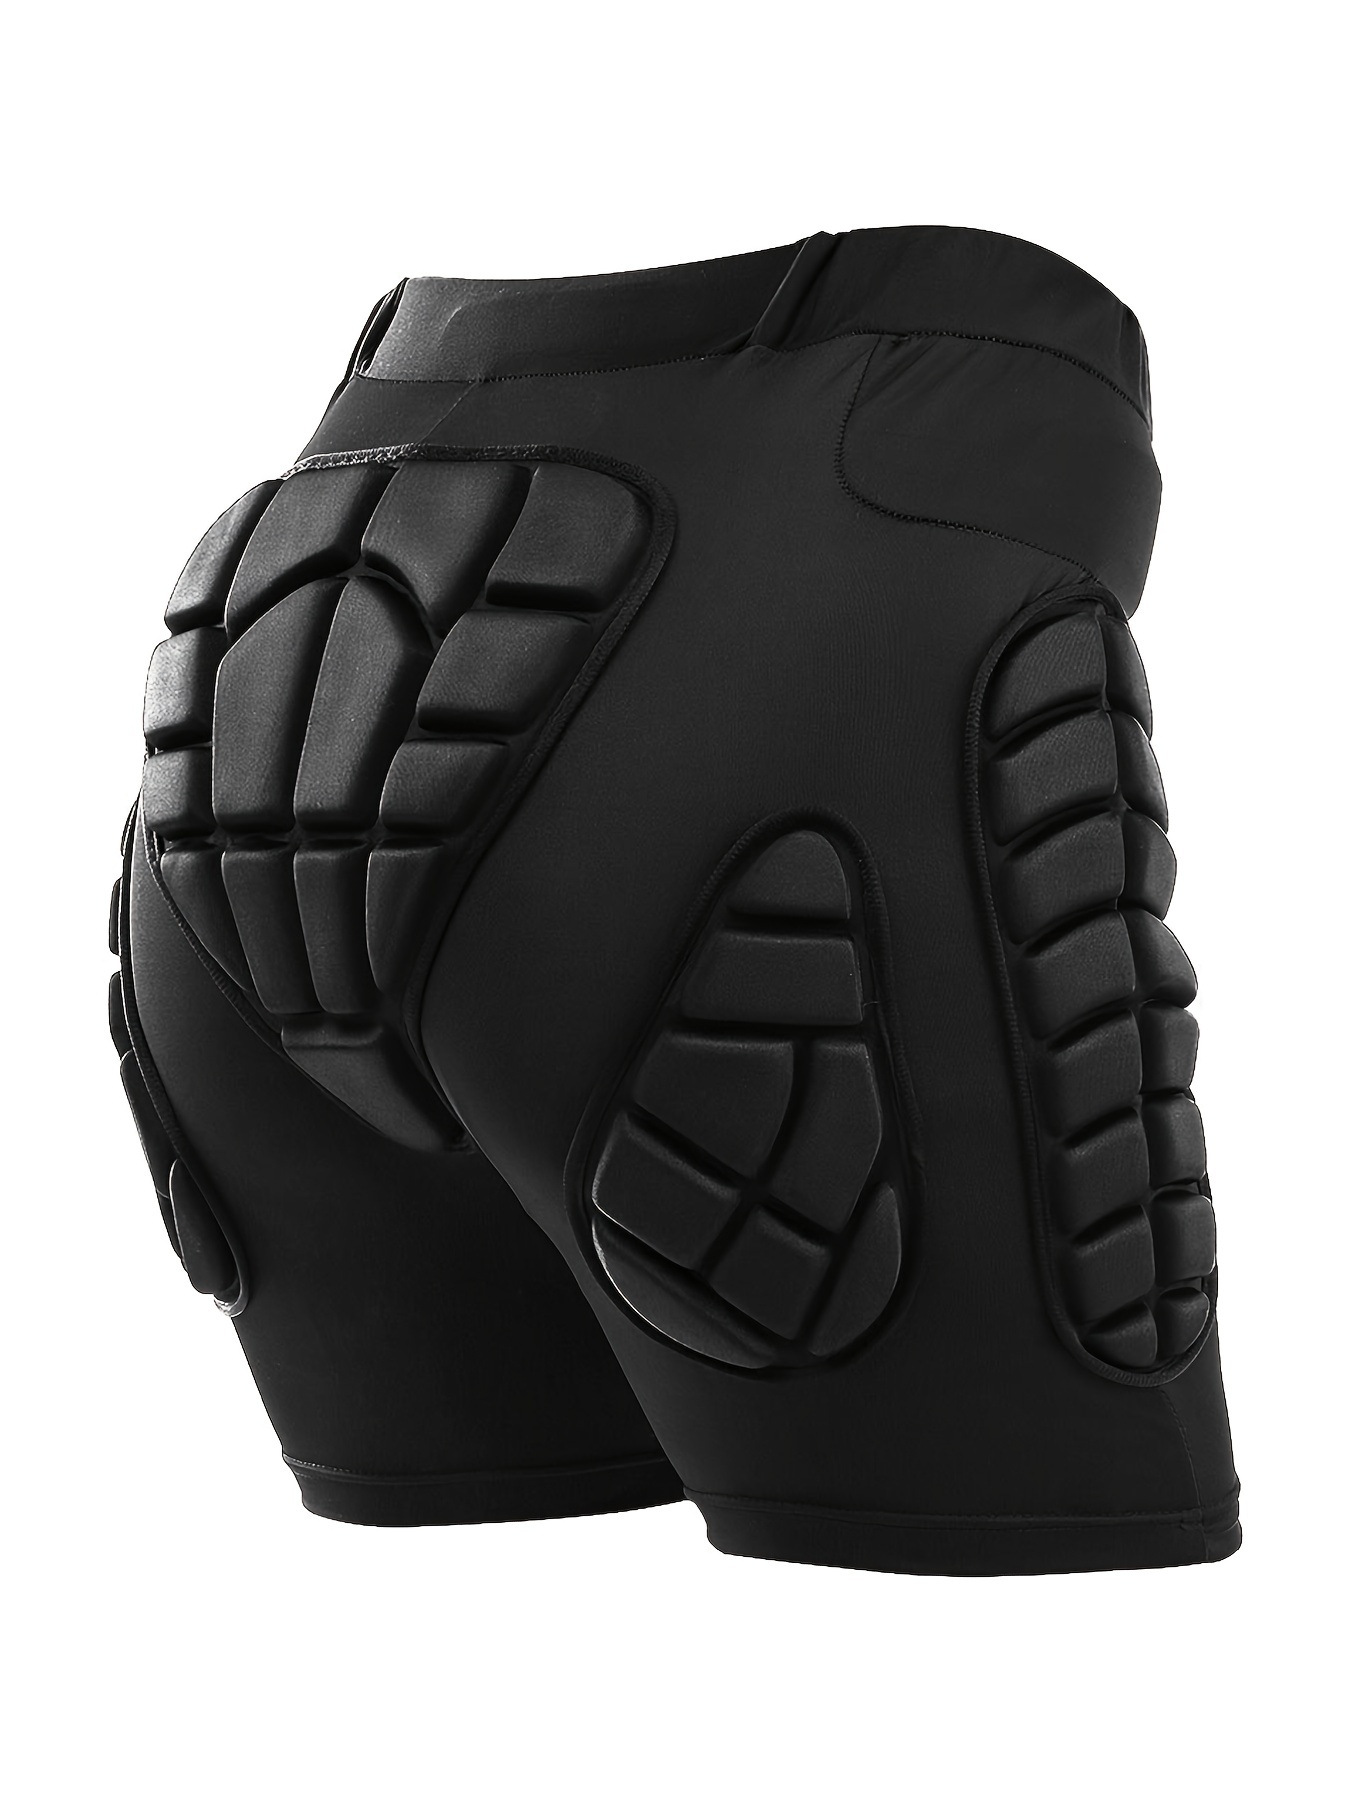 Best Ski Snowboard Padded Shorts Pants, Protective Gear & Knee Pads